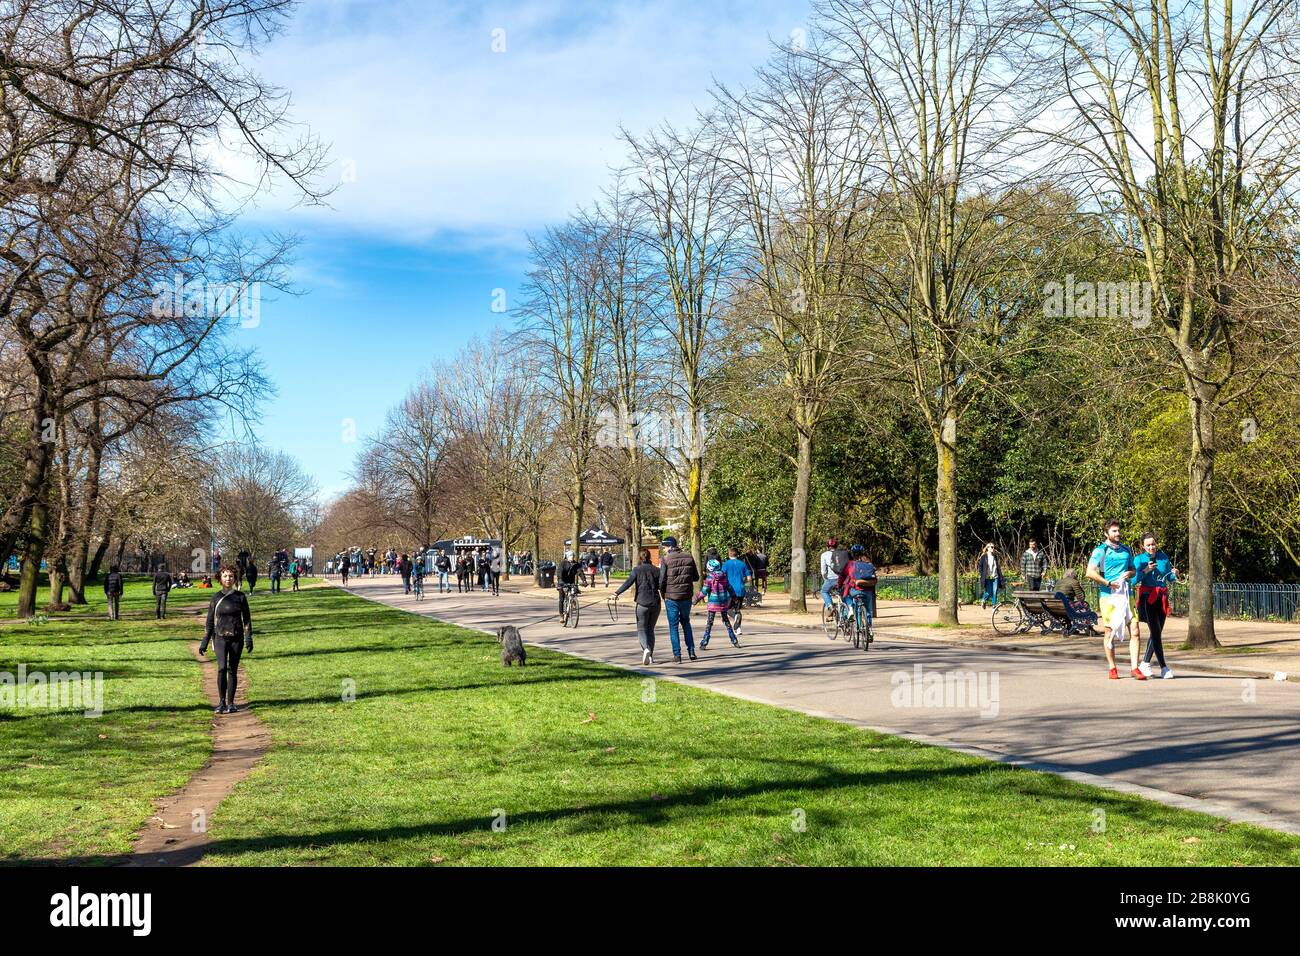 22 March 2020 - London, UK - global coronavirus pandemic, big groups of people visiting Victoria Park despite government urging people to stay at home and practice social distancing to prevent the spread of the coronavirus Covid-19, people going for a walk in the park Stock Photo